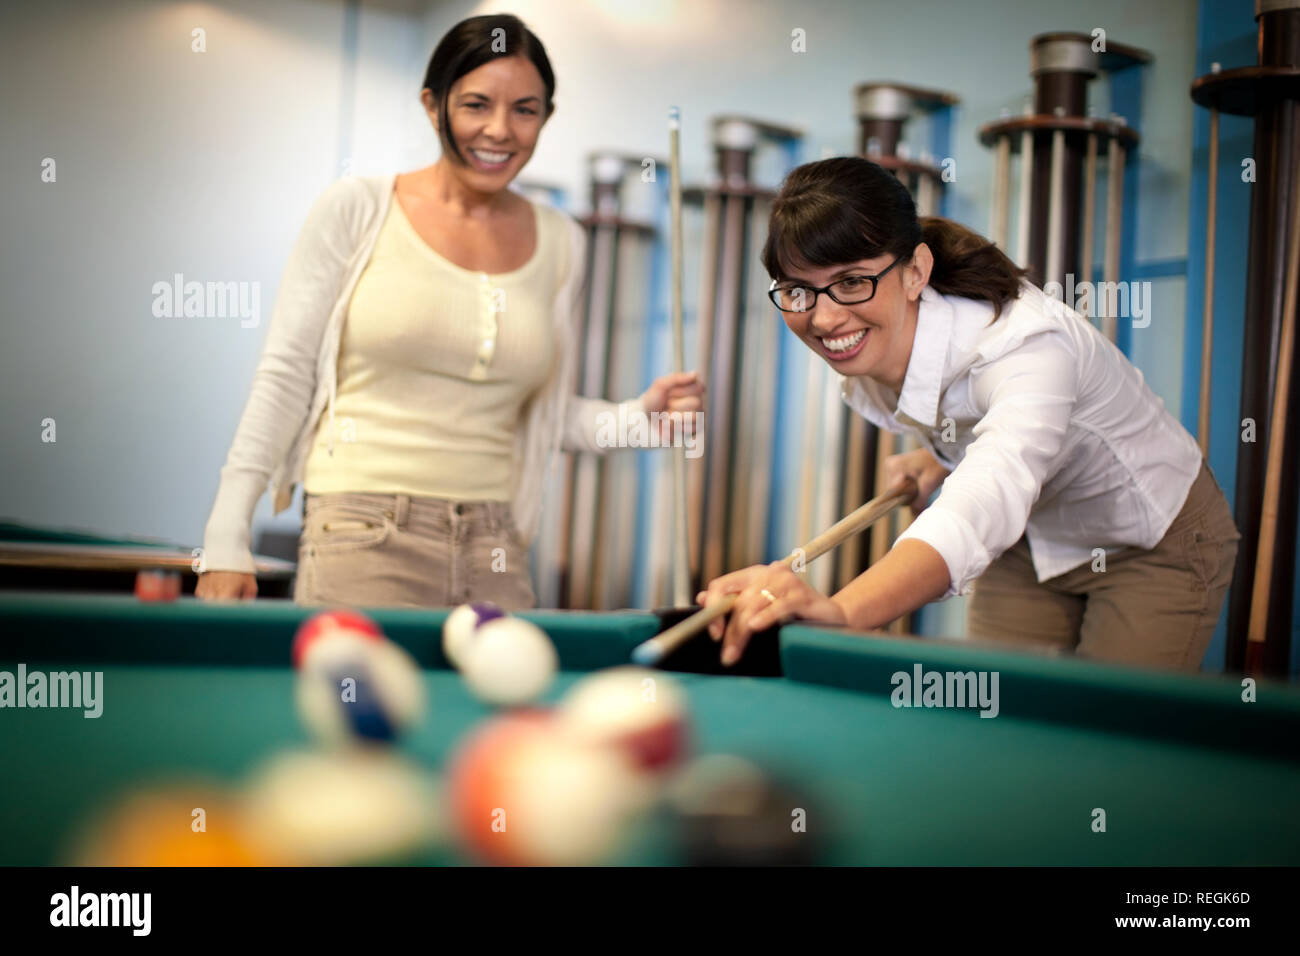 Two young woman playing a friendly game of pool. Stock Photo